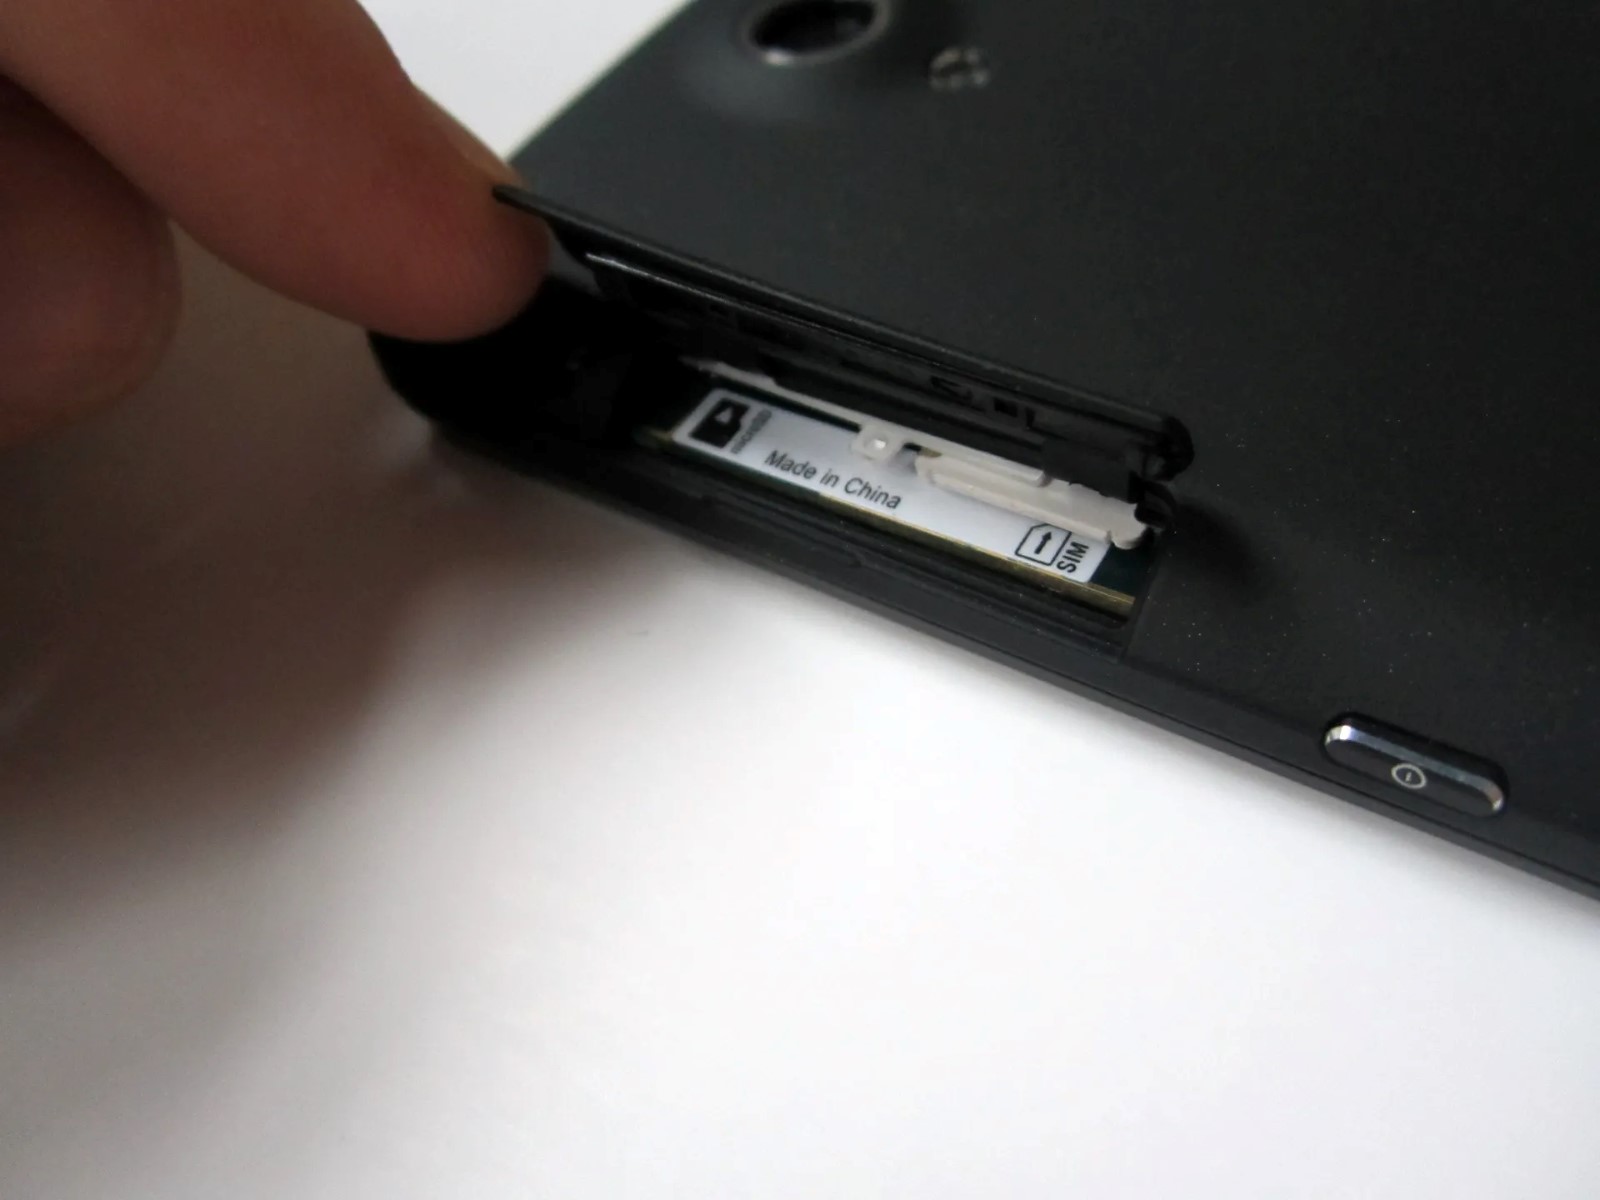 Inserting SIM Card In Sony Xperia: A Step-by-Step Guide